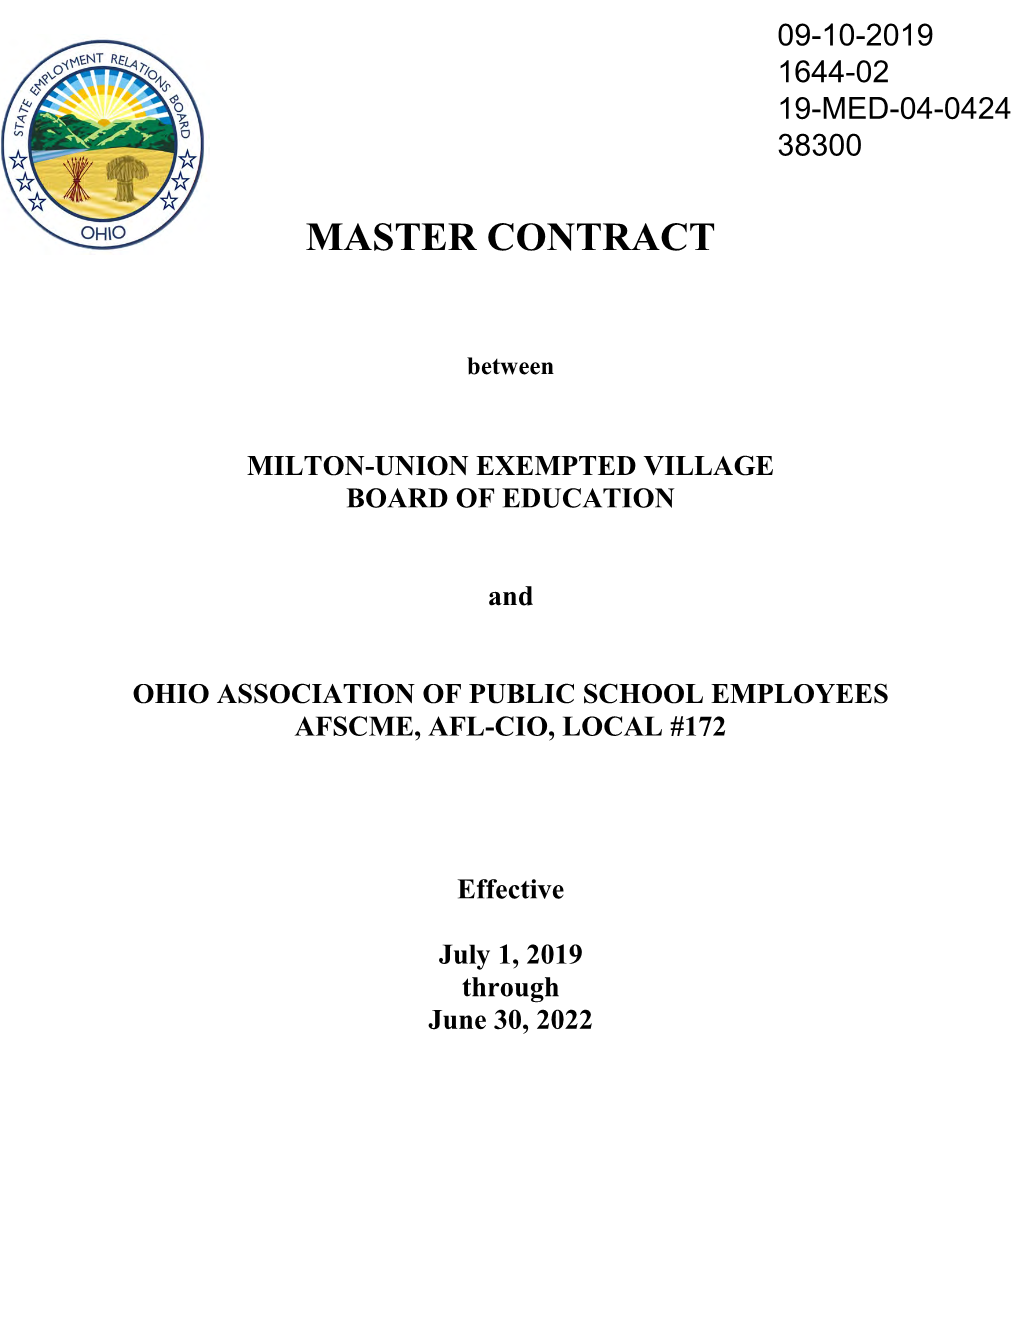 Master Contract